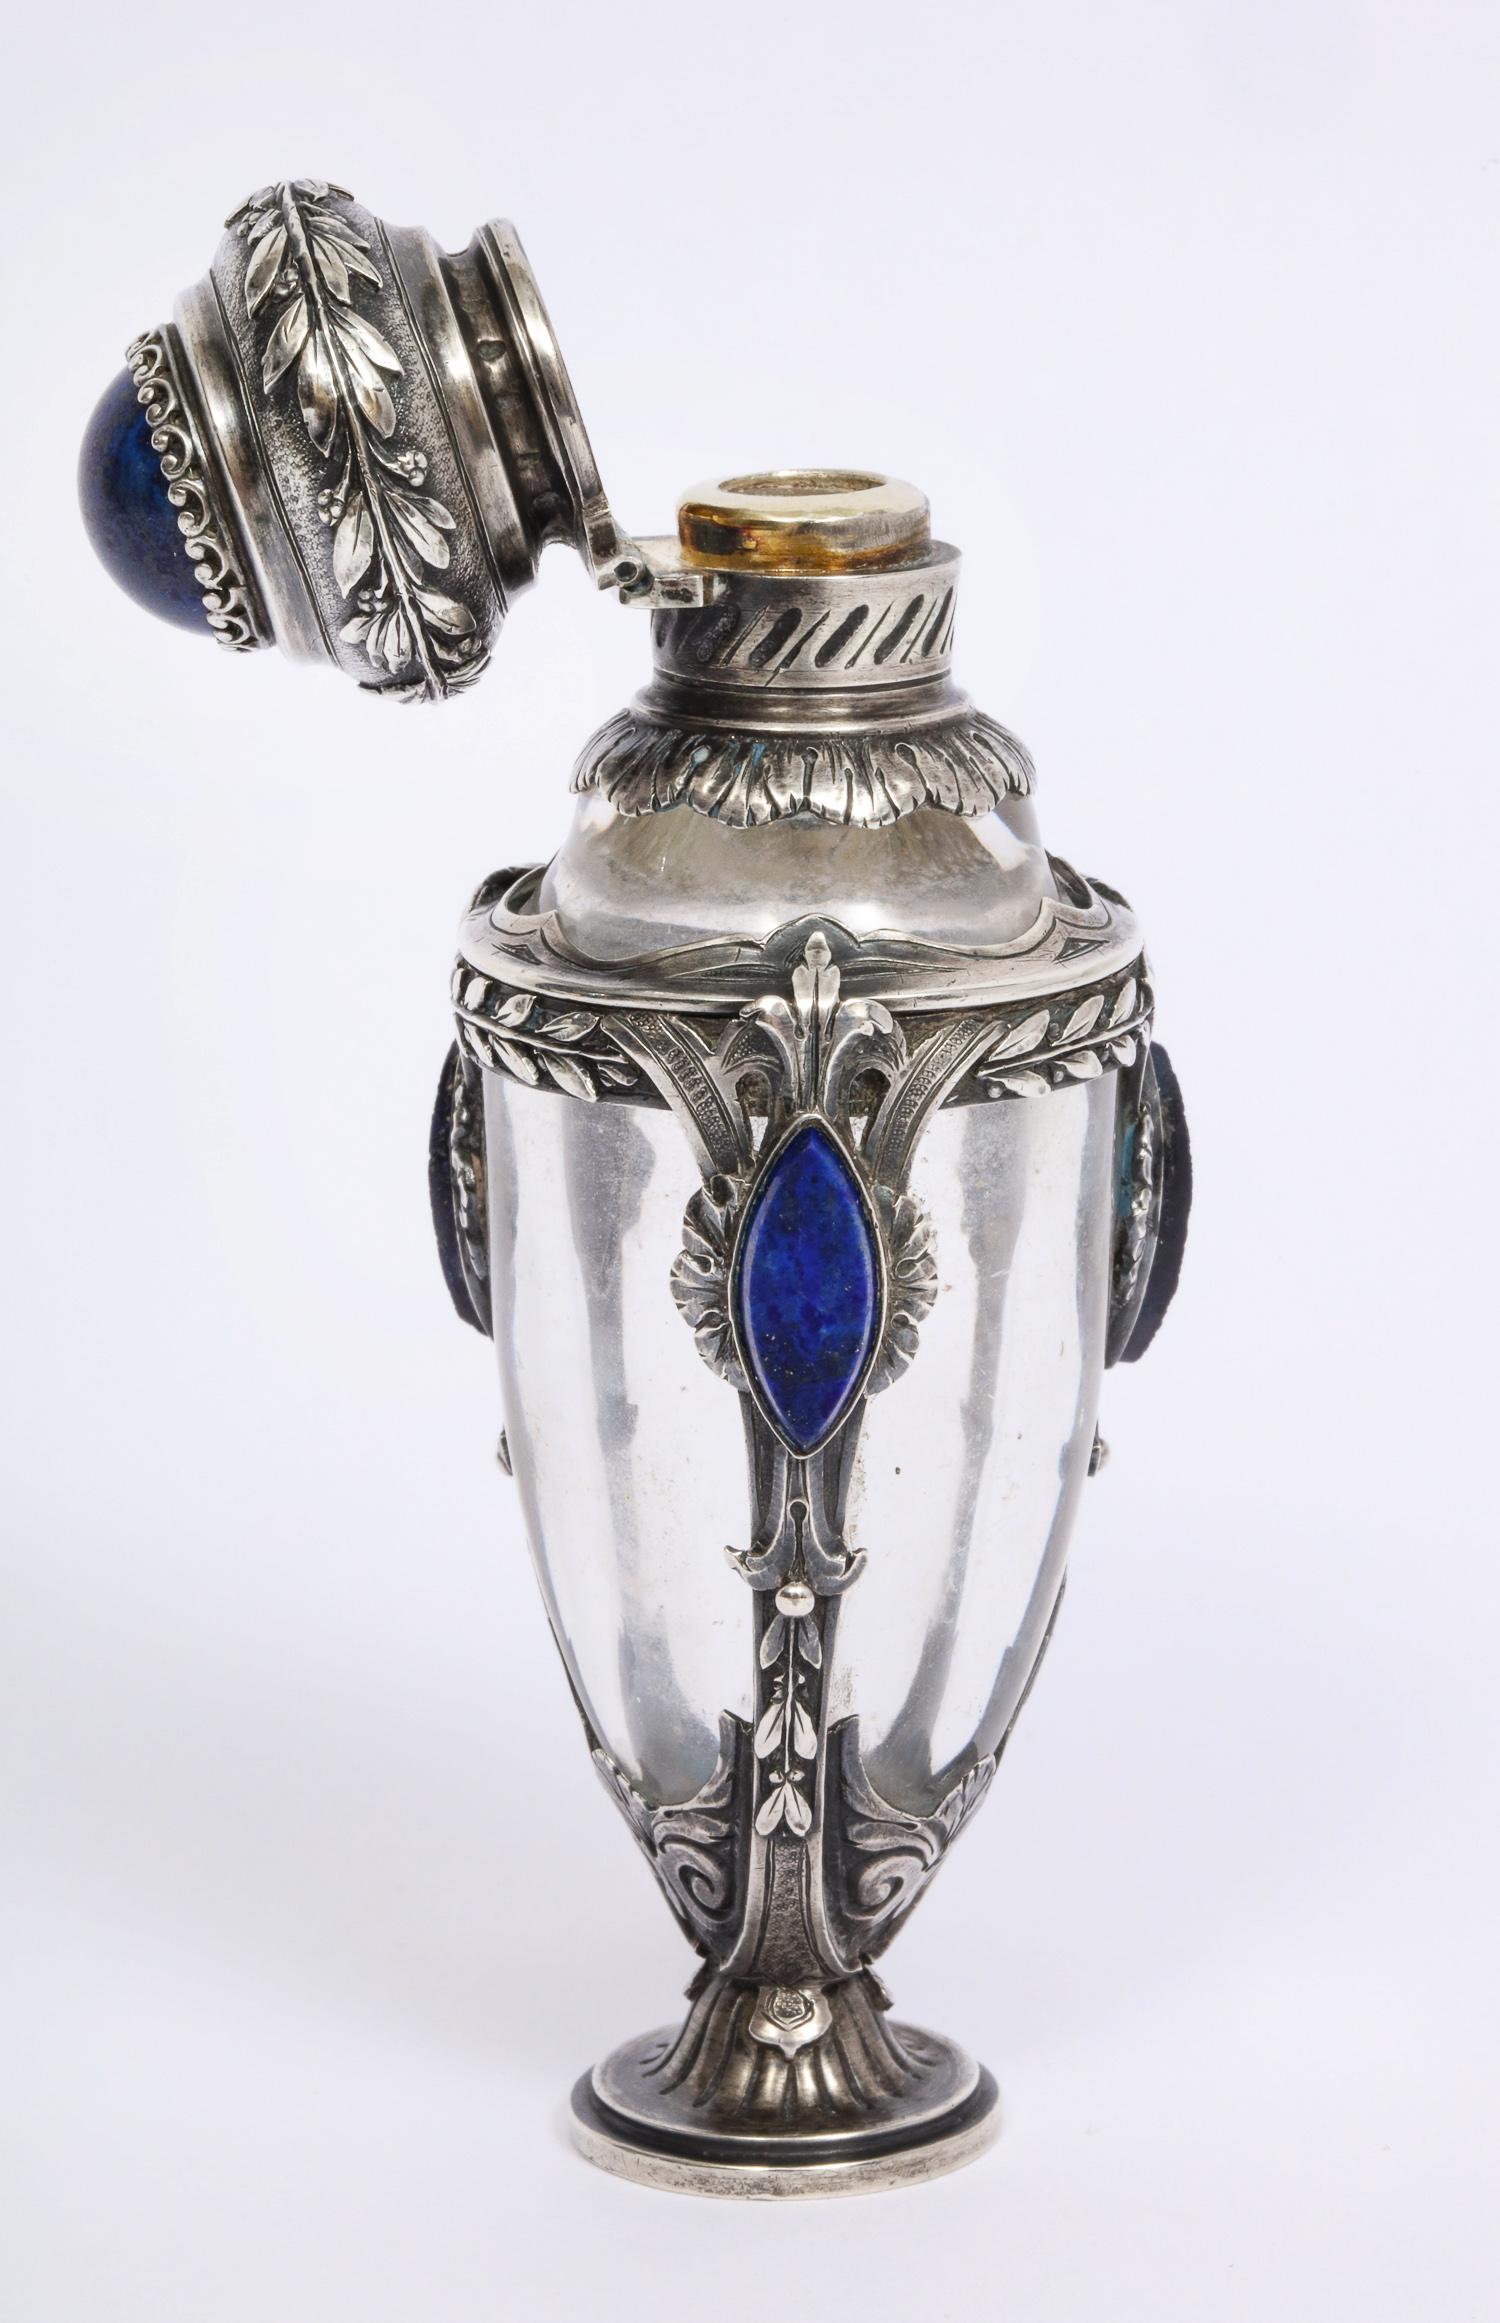 19th Century Beautiful French Silver, Lapis Lazuli, and Glass Perfume Scent Bottle